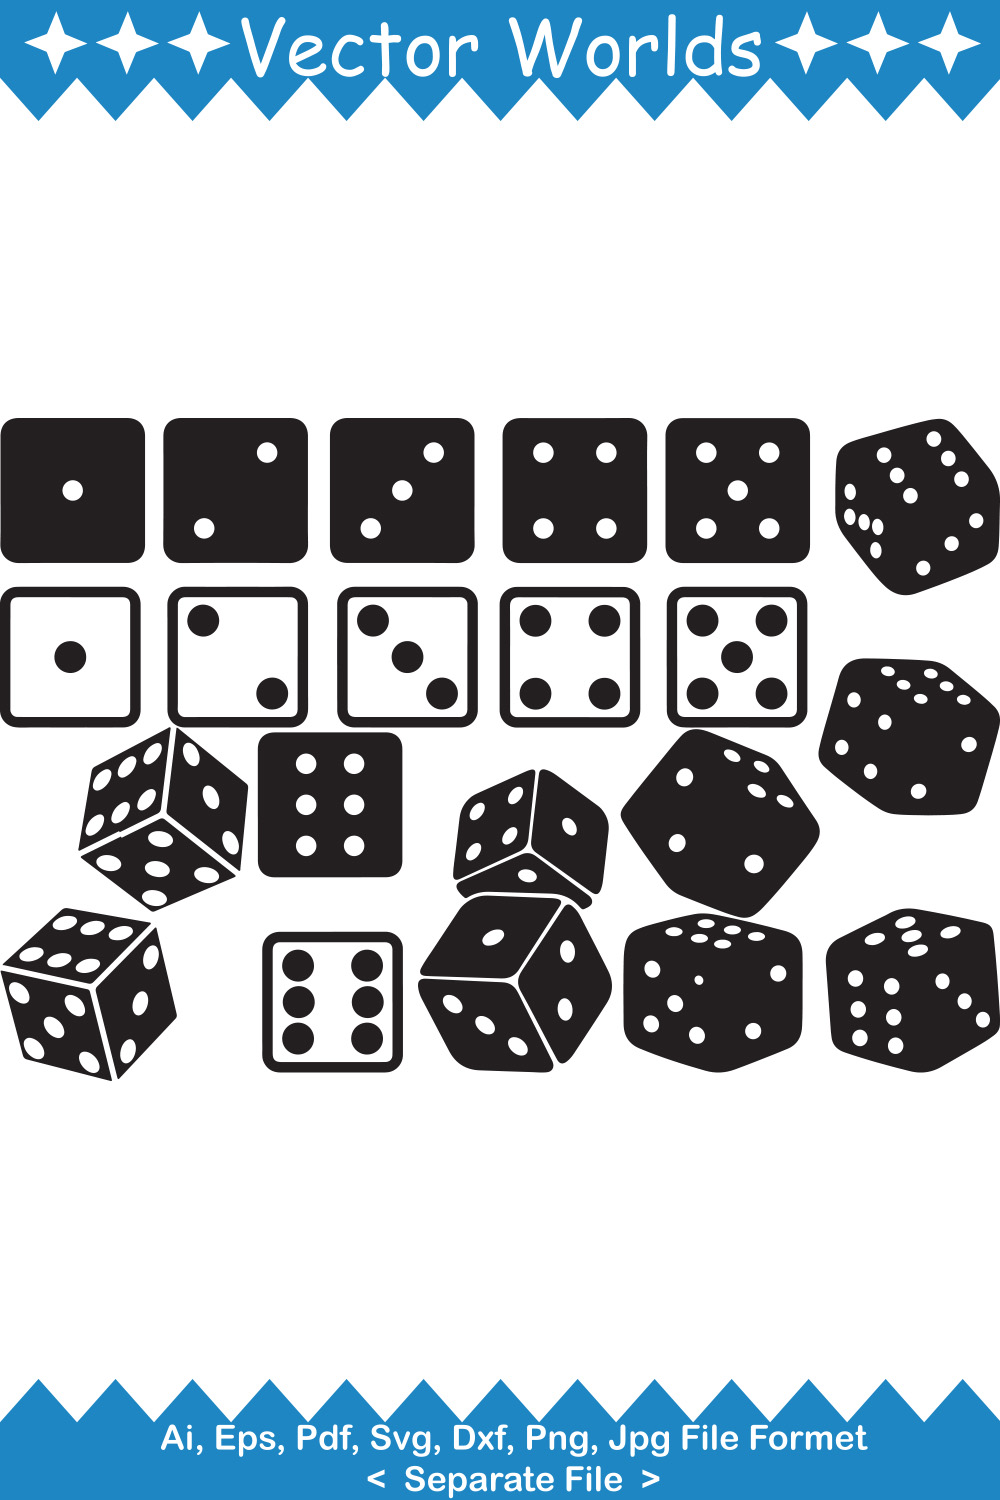 A selection of unique images of dice silhouettes